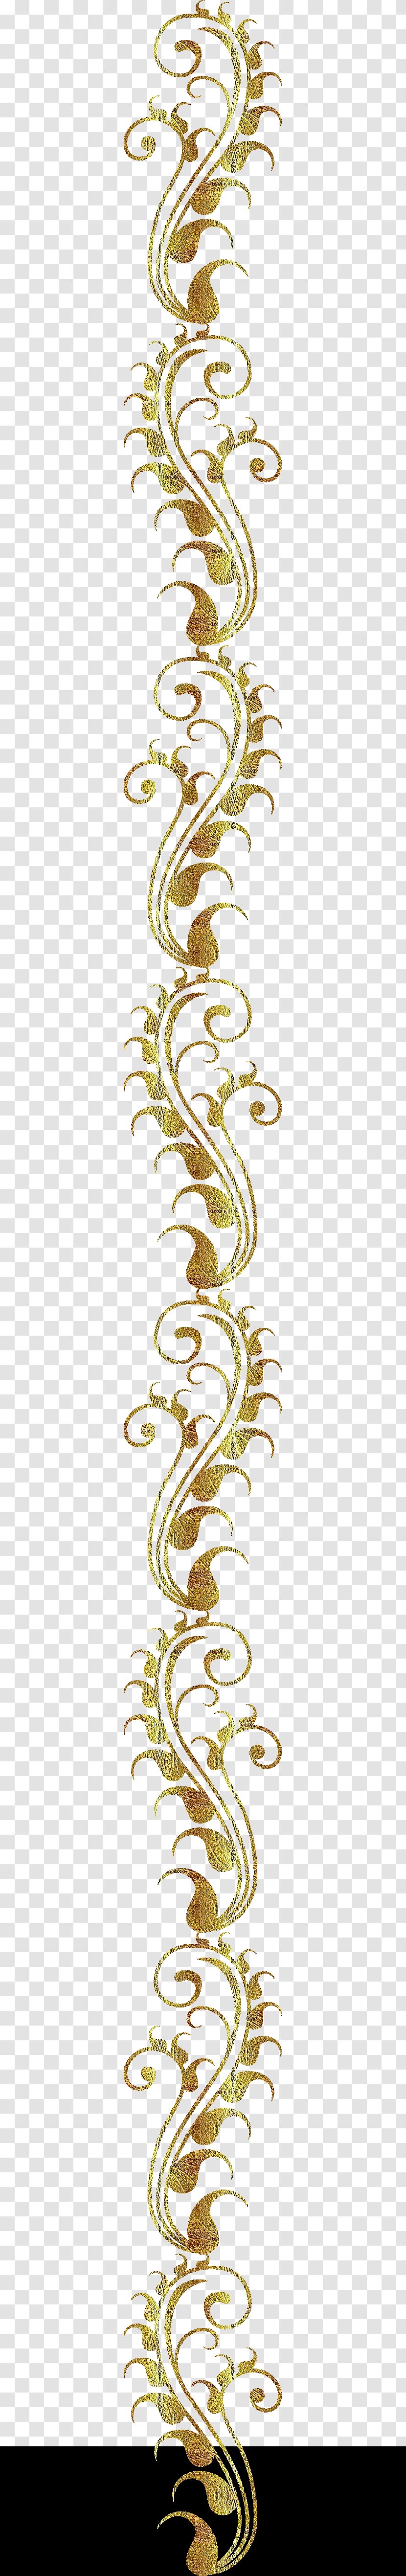 Line Angle - Yellow - Hand-painted Floral Decorative Borders Transparent PNG